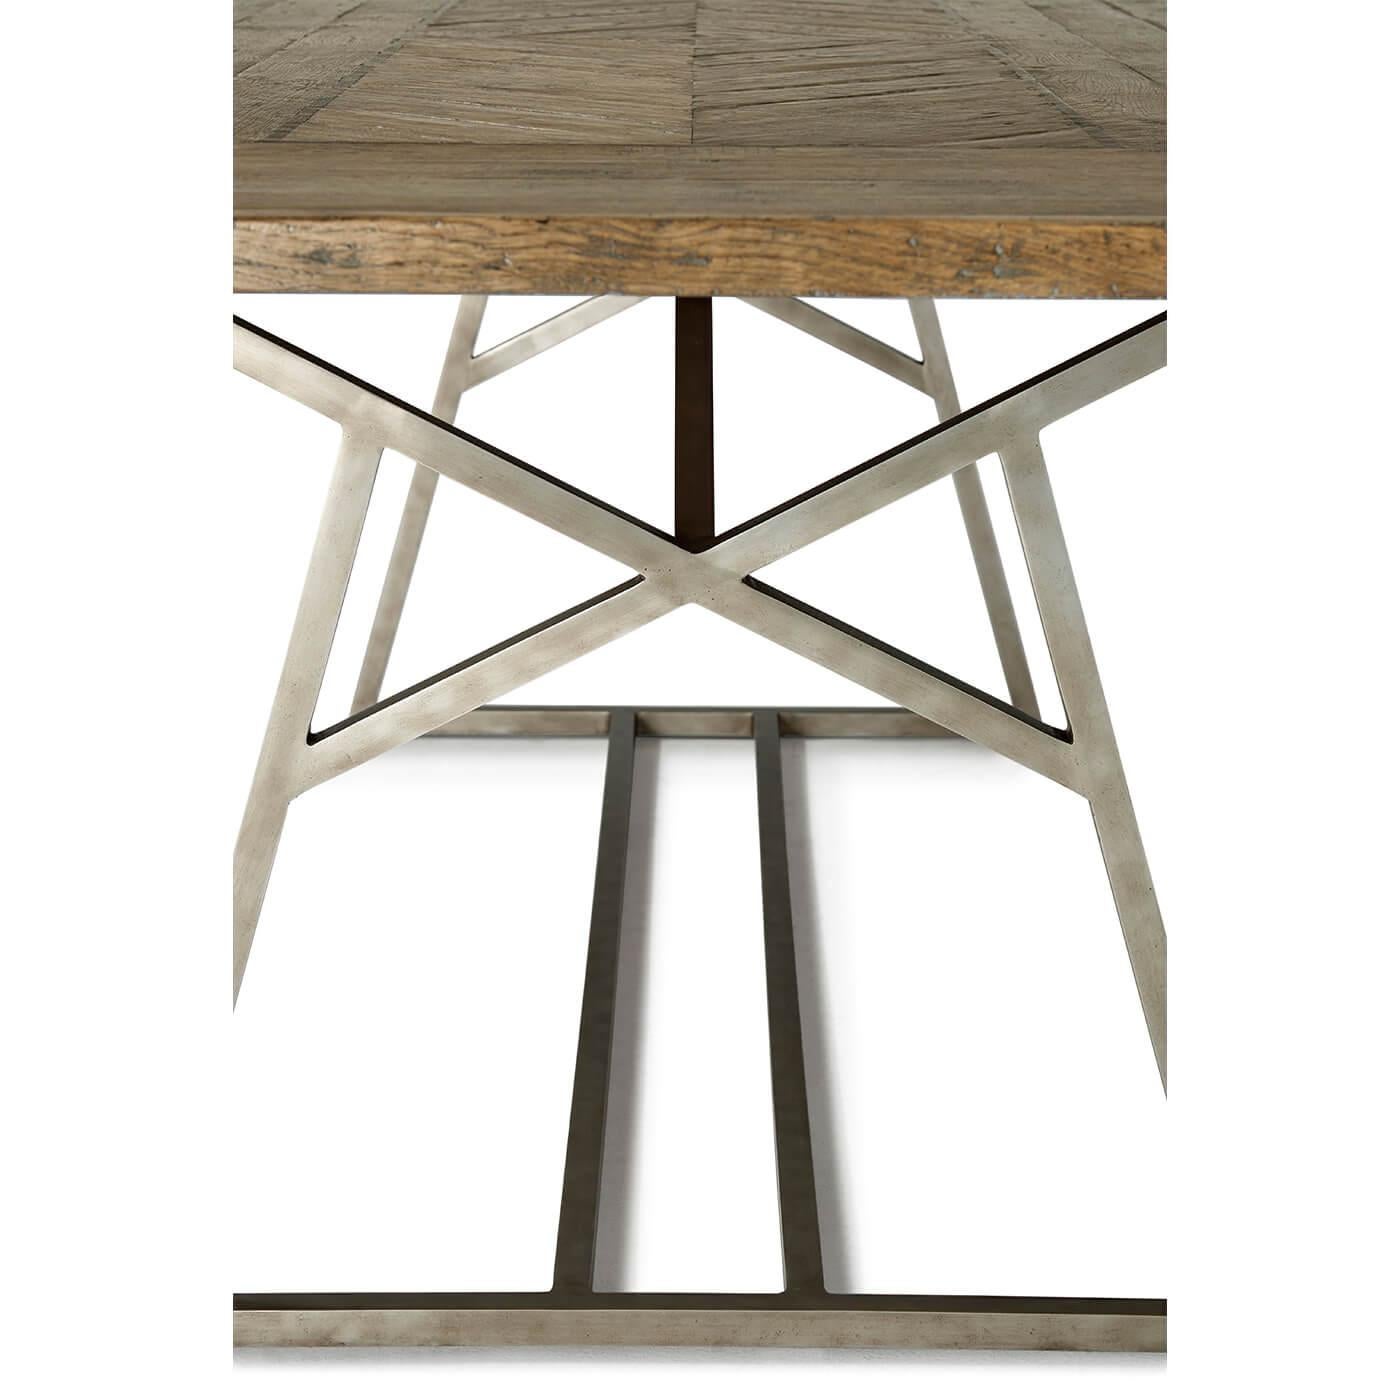 European Rustic Parquetry Oak Dining Table